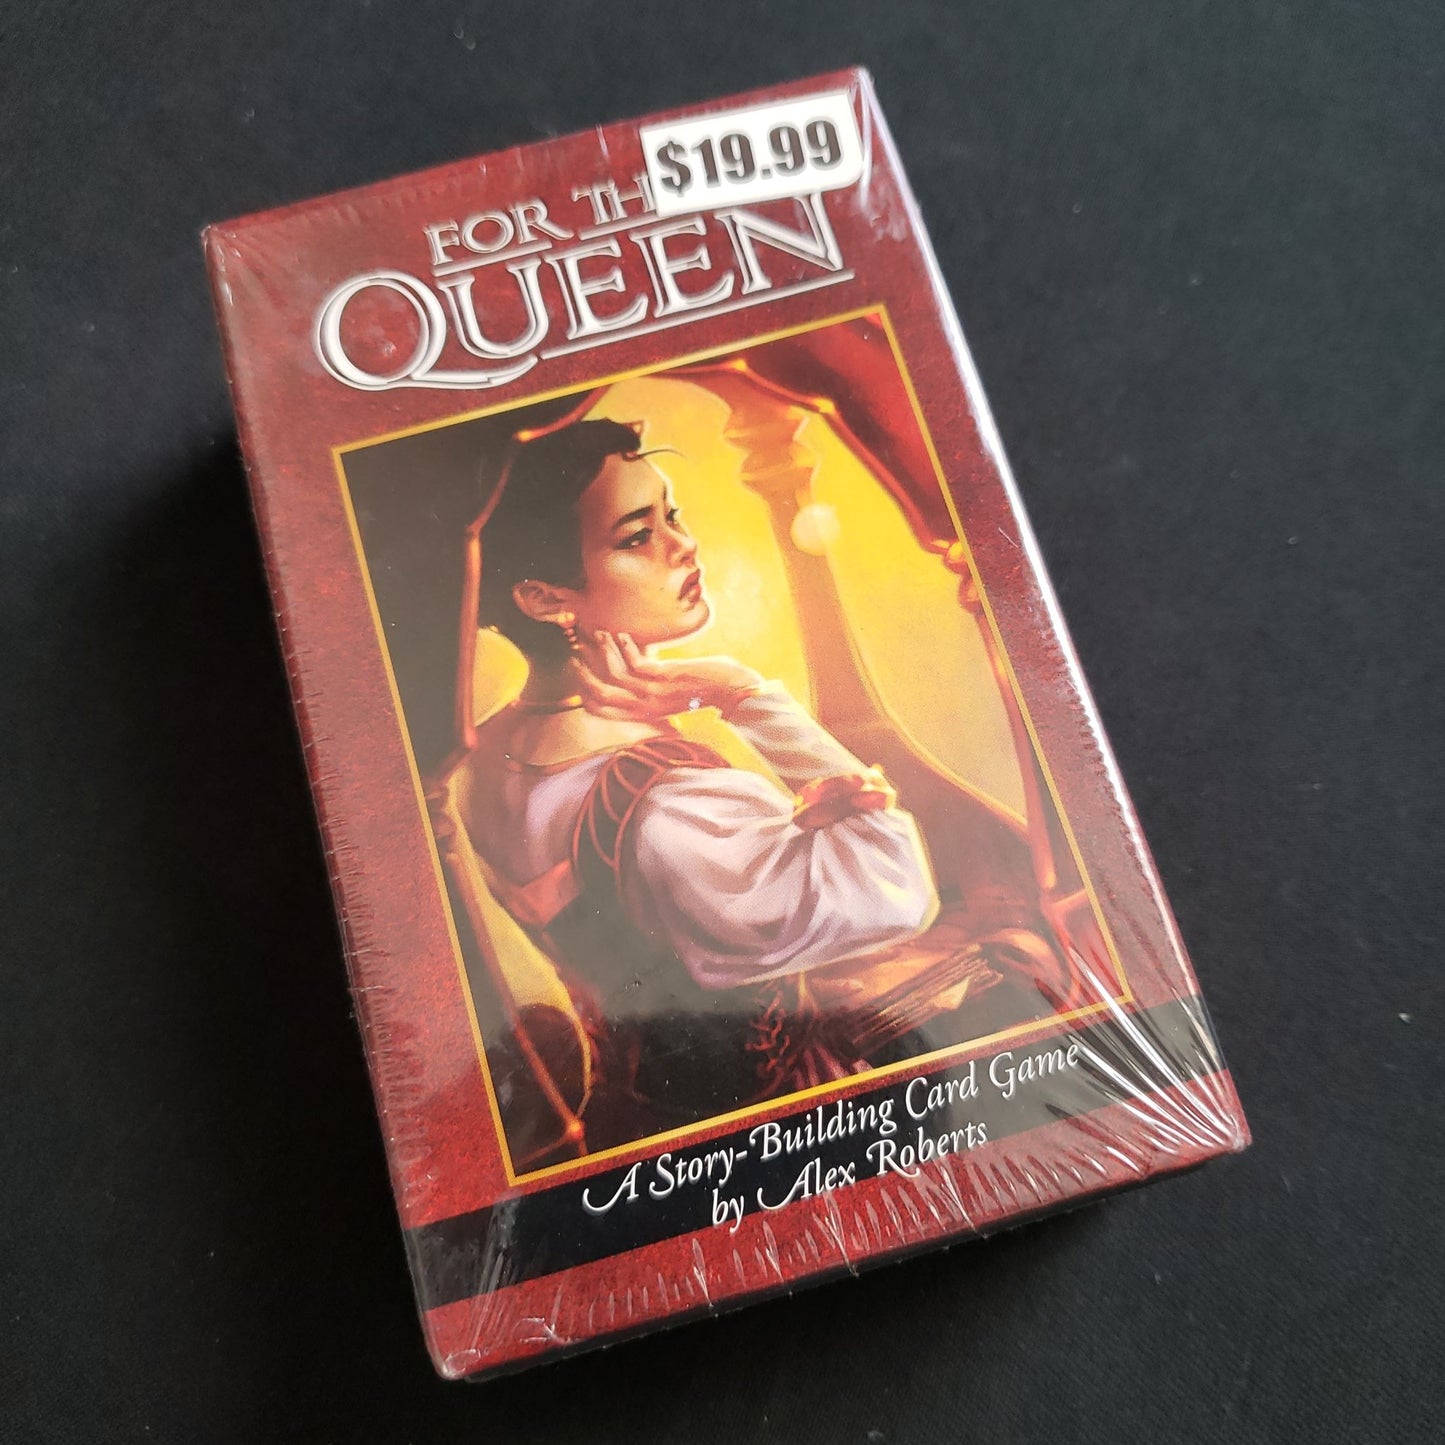 For the Queen roleplaying game - front cover of box